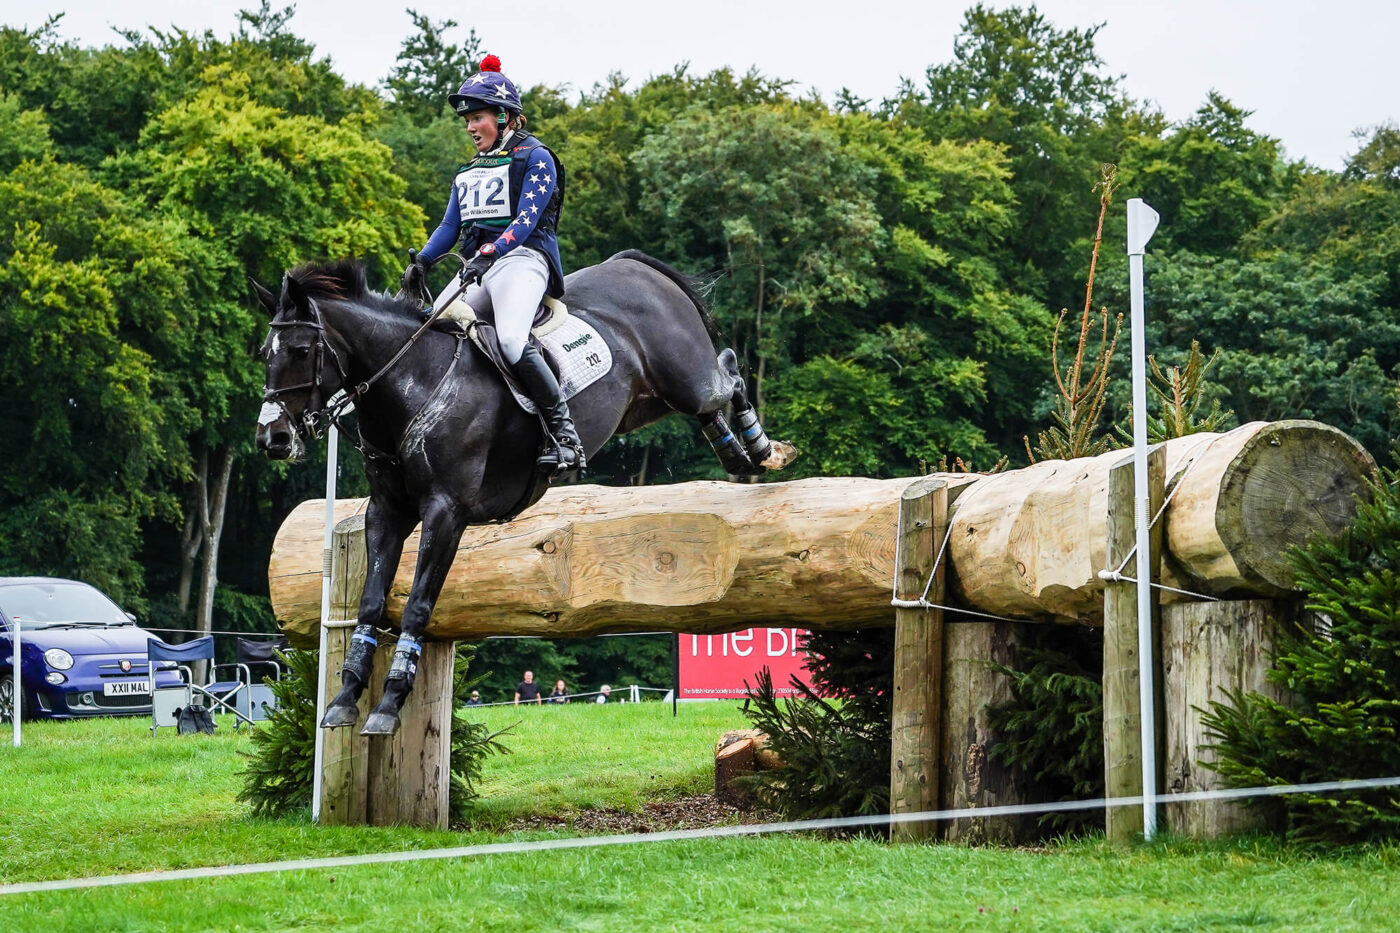 Alicia Wilkinson and Incognito competing at Blenheim Horse Trials